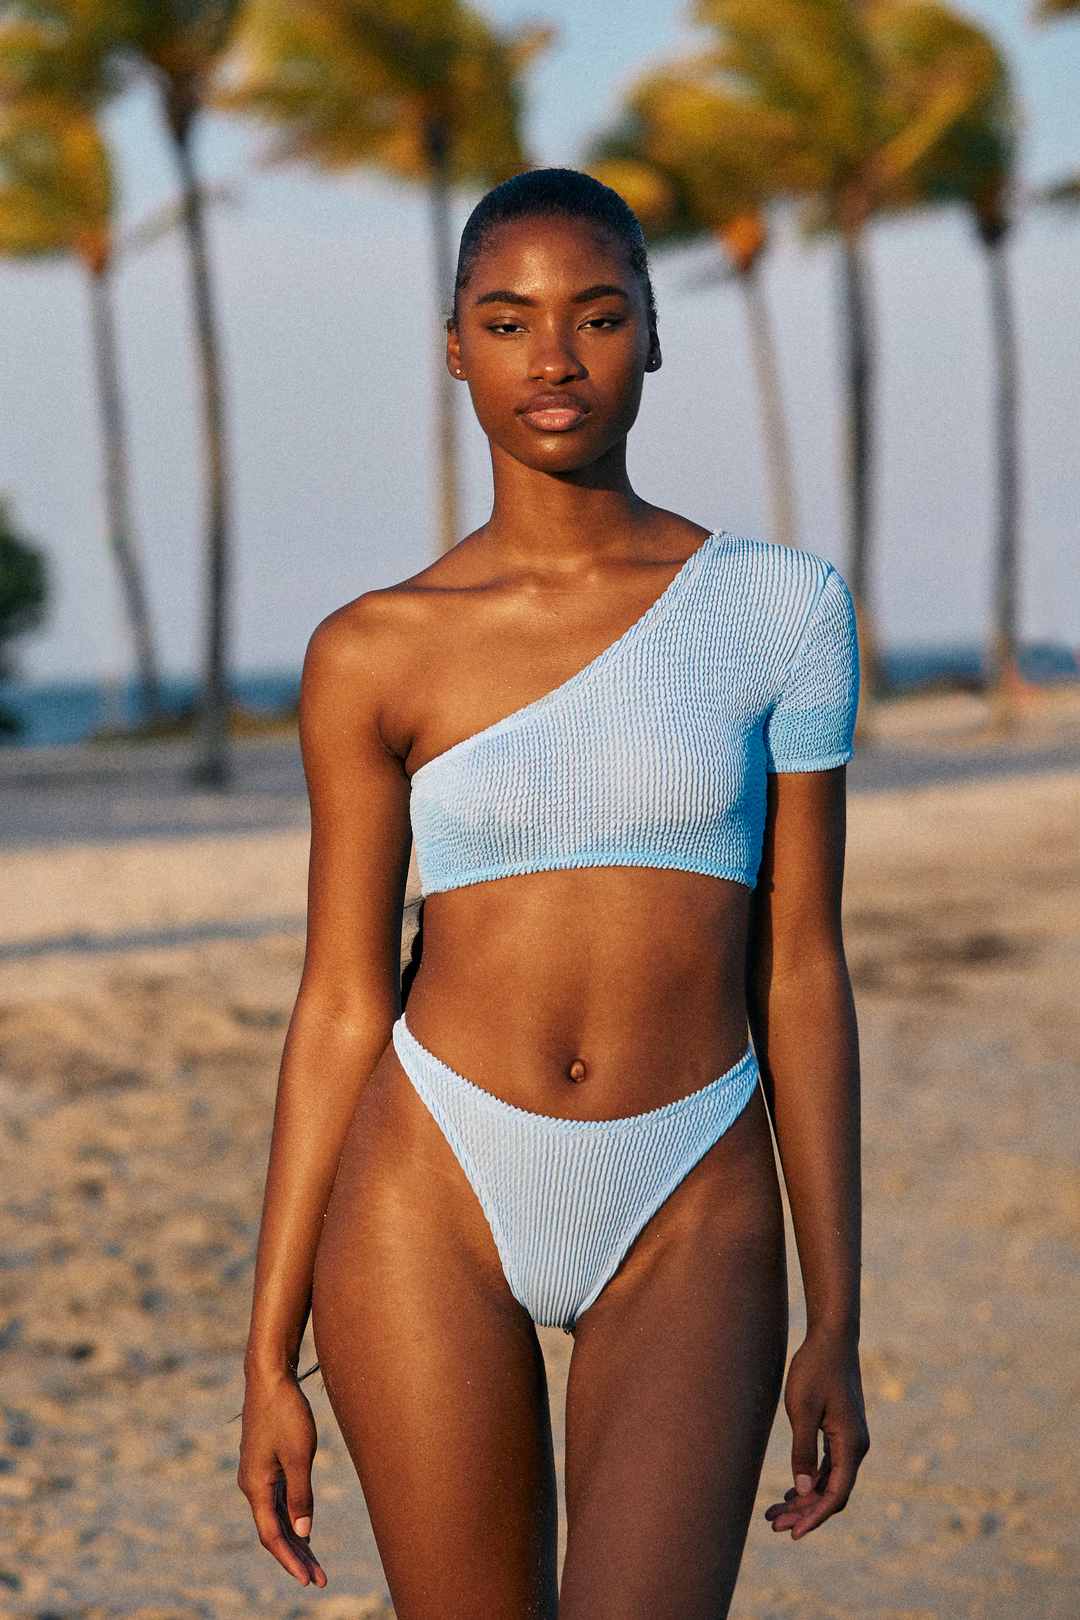 brittany vialpando recommends Black Women In Bathing Suits